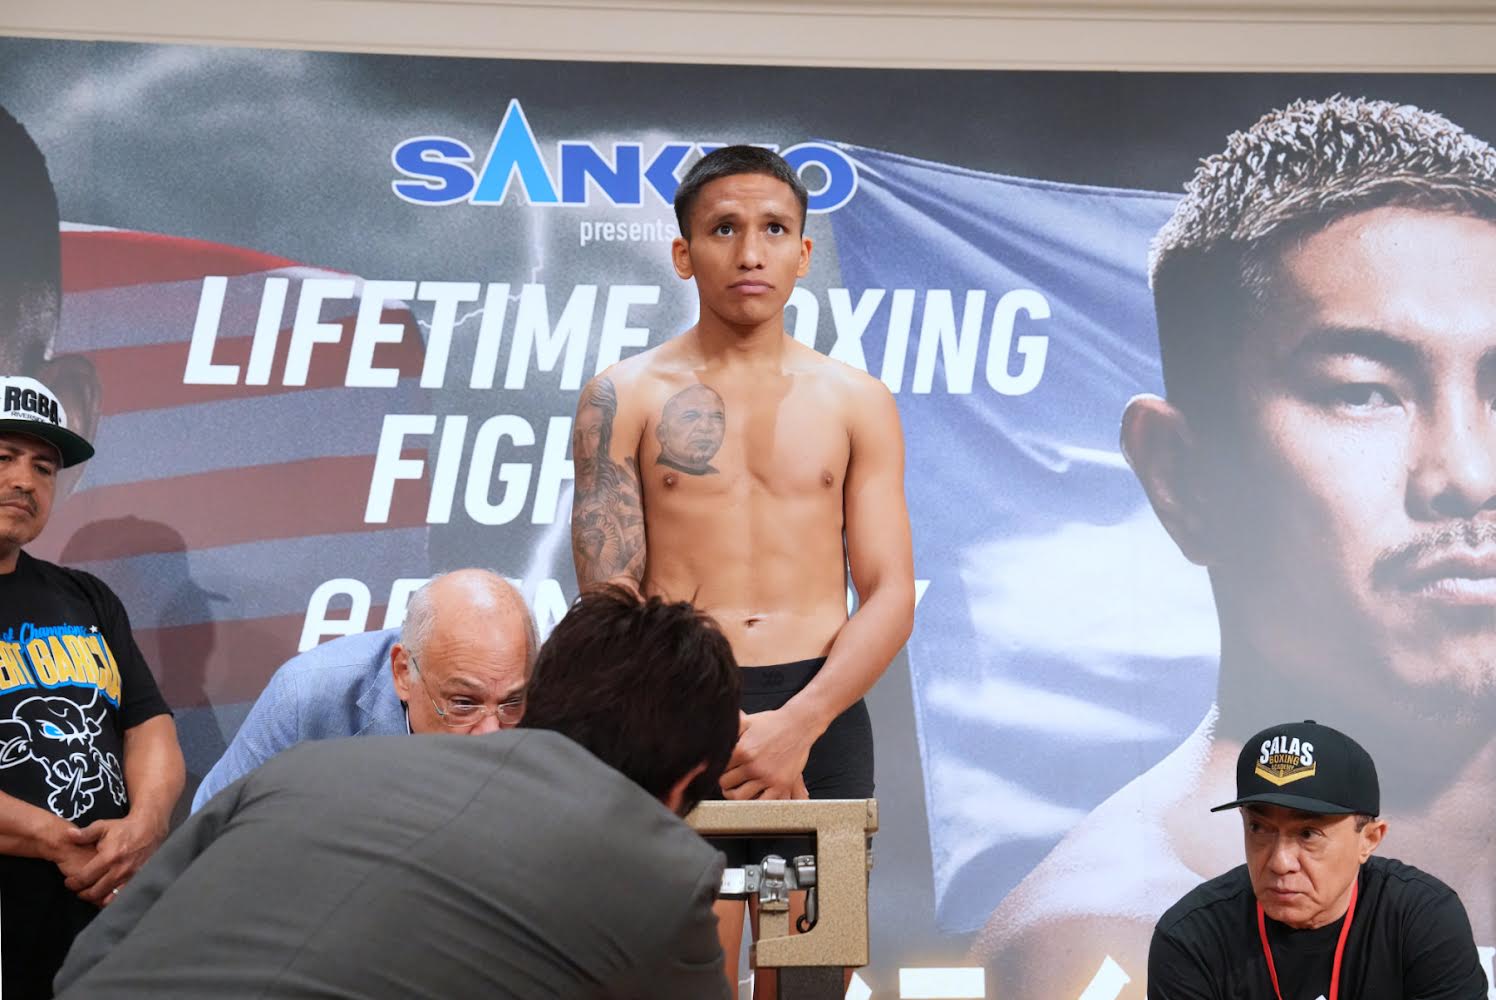 Franco failed to make weight and lost his title on the scales 